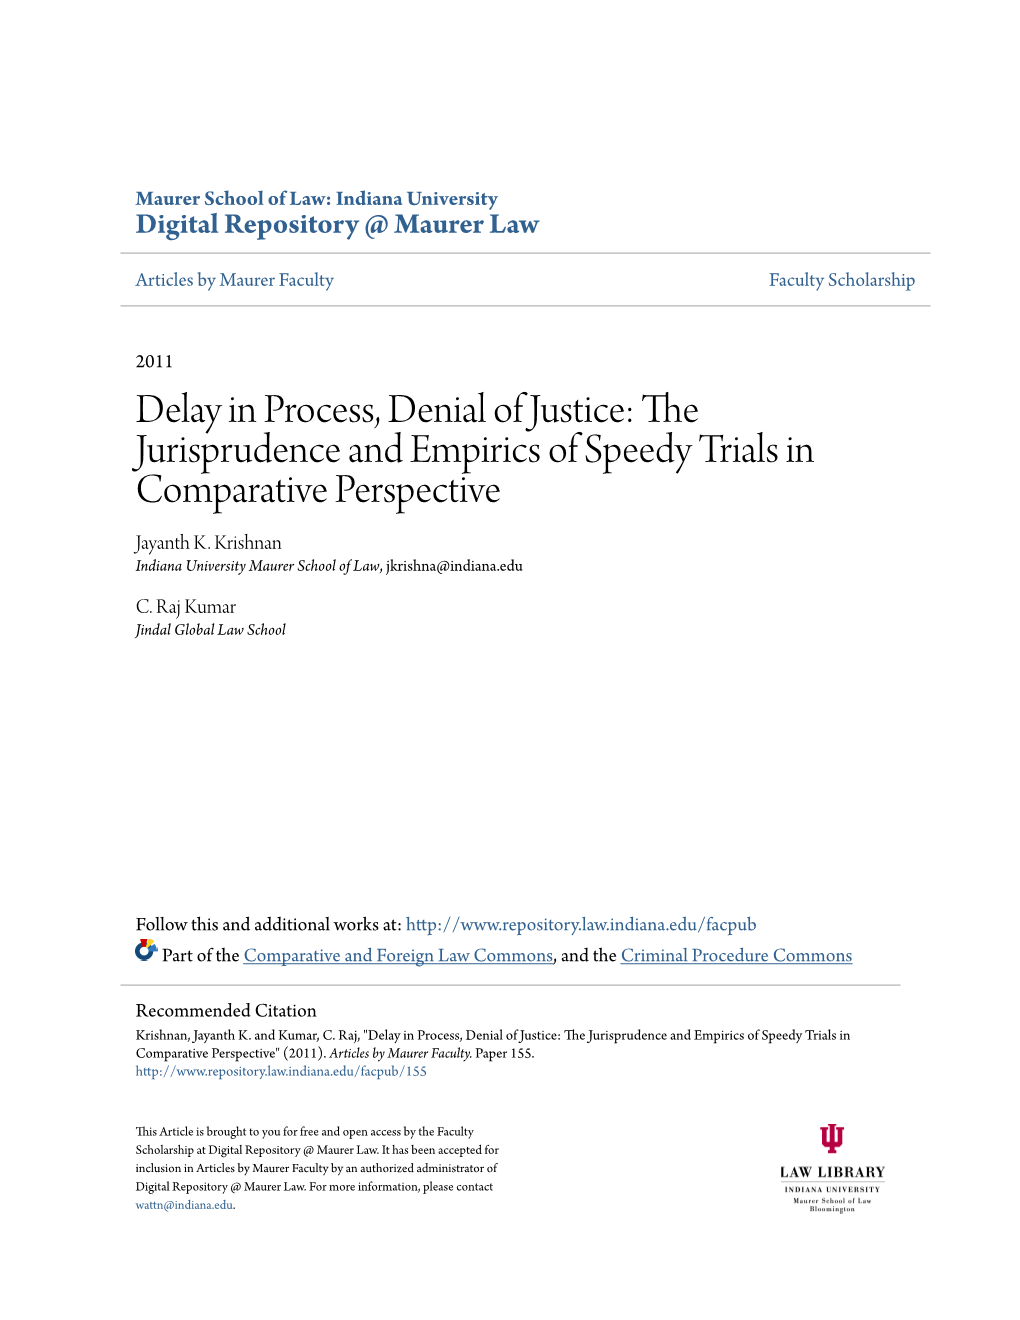 Delay in Process, Denial of Justice: the Jurisprudence and Empirics of Speedy Trials in Comparative Perspective Jayanth K